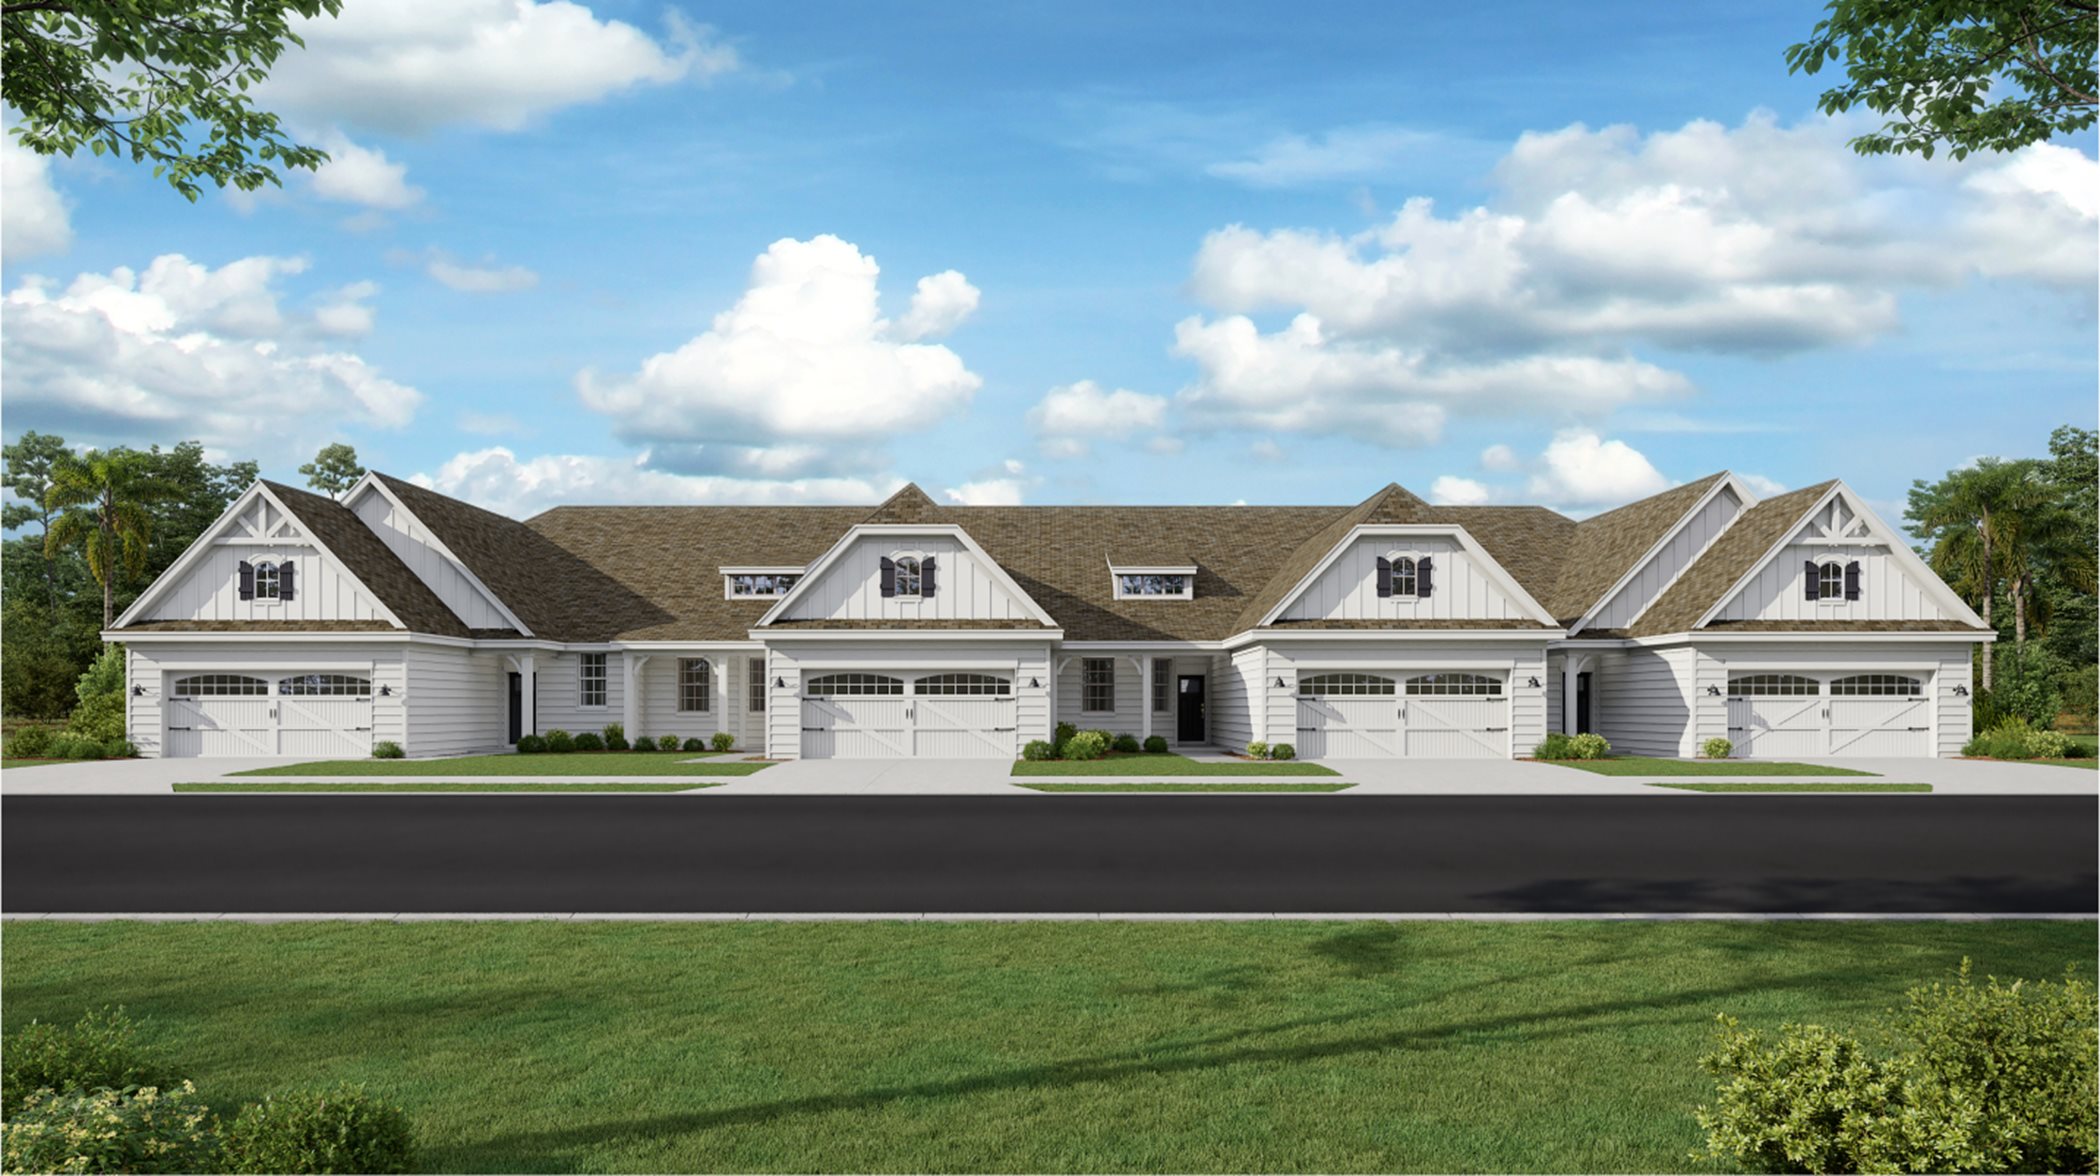 Town Mill Townhomes exteriors